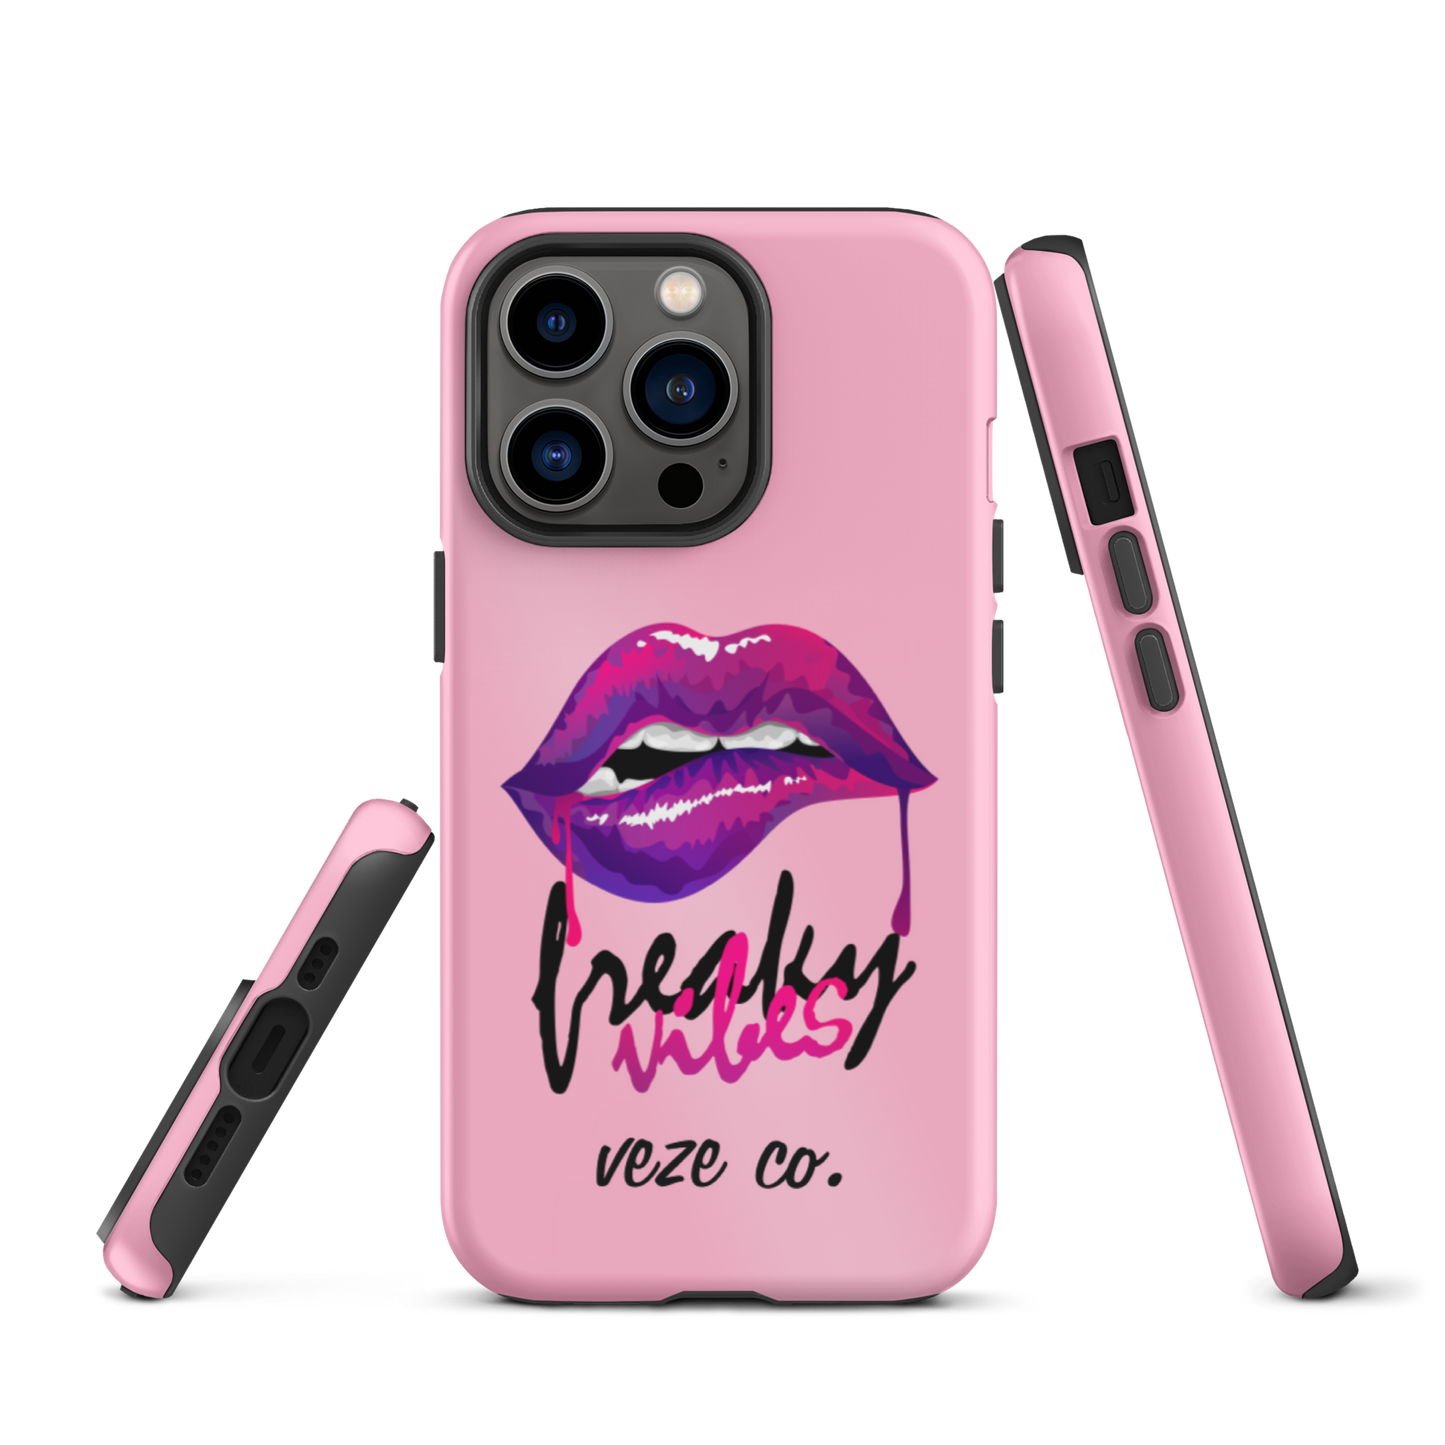 Freaky Vibes (Pink) - iPhone Case